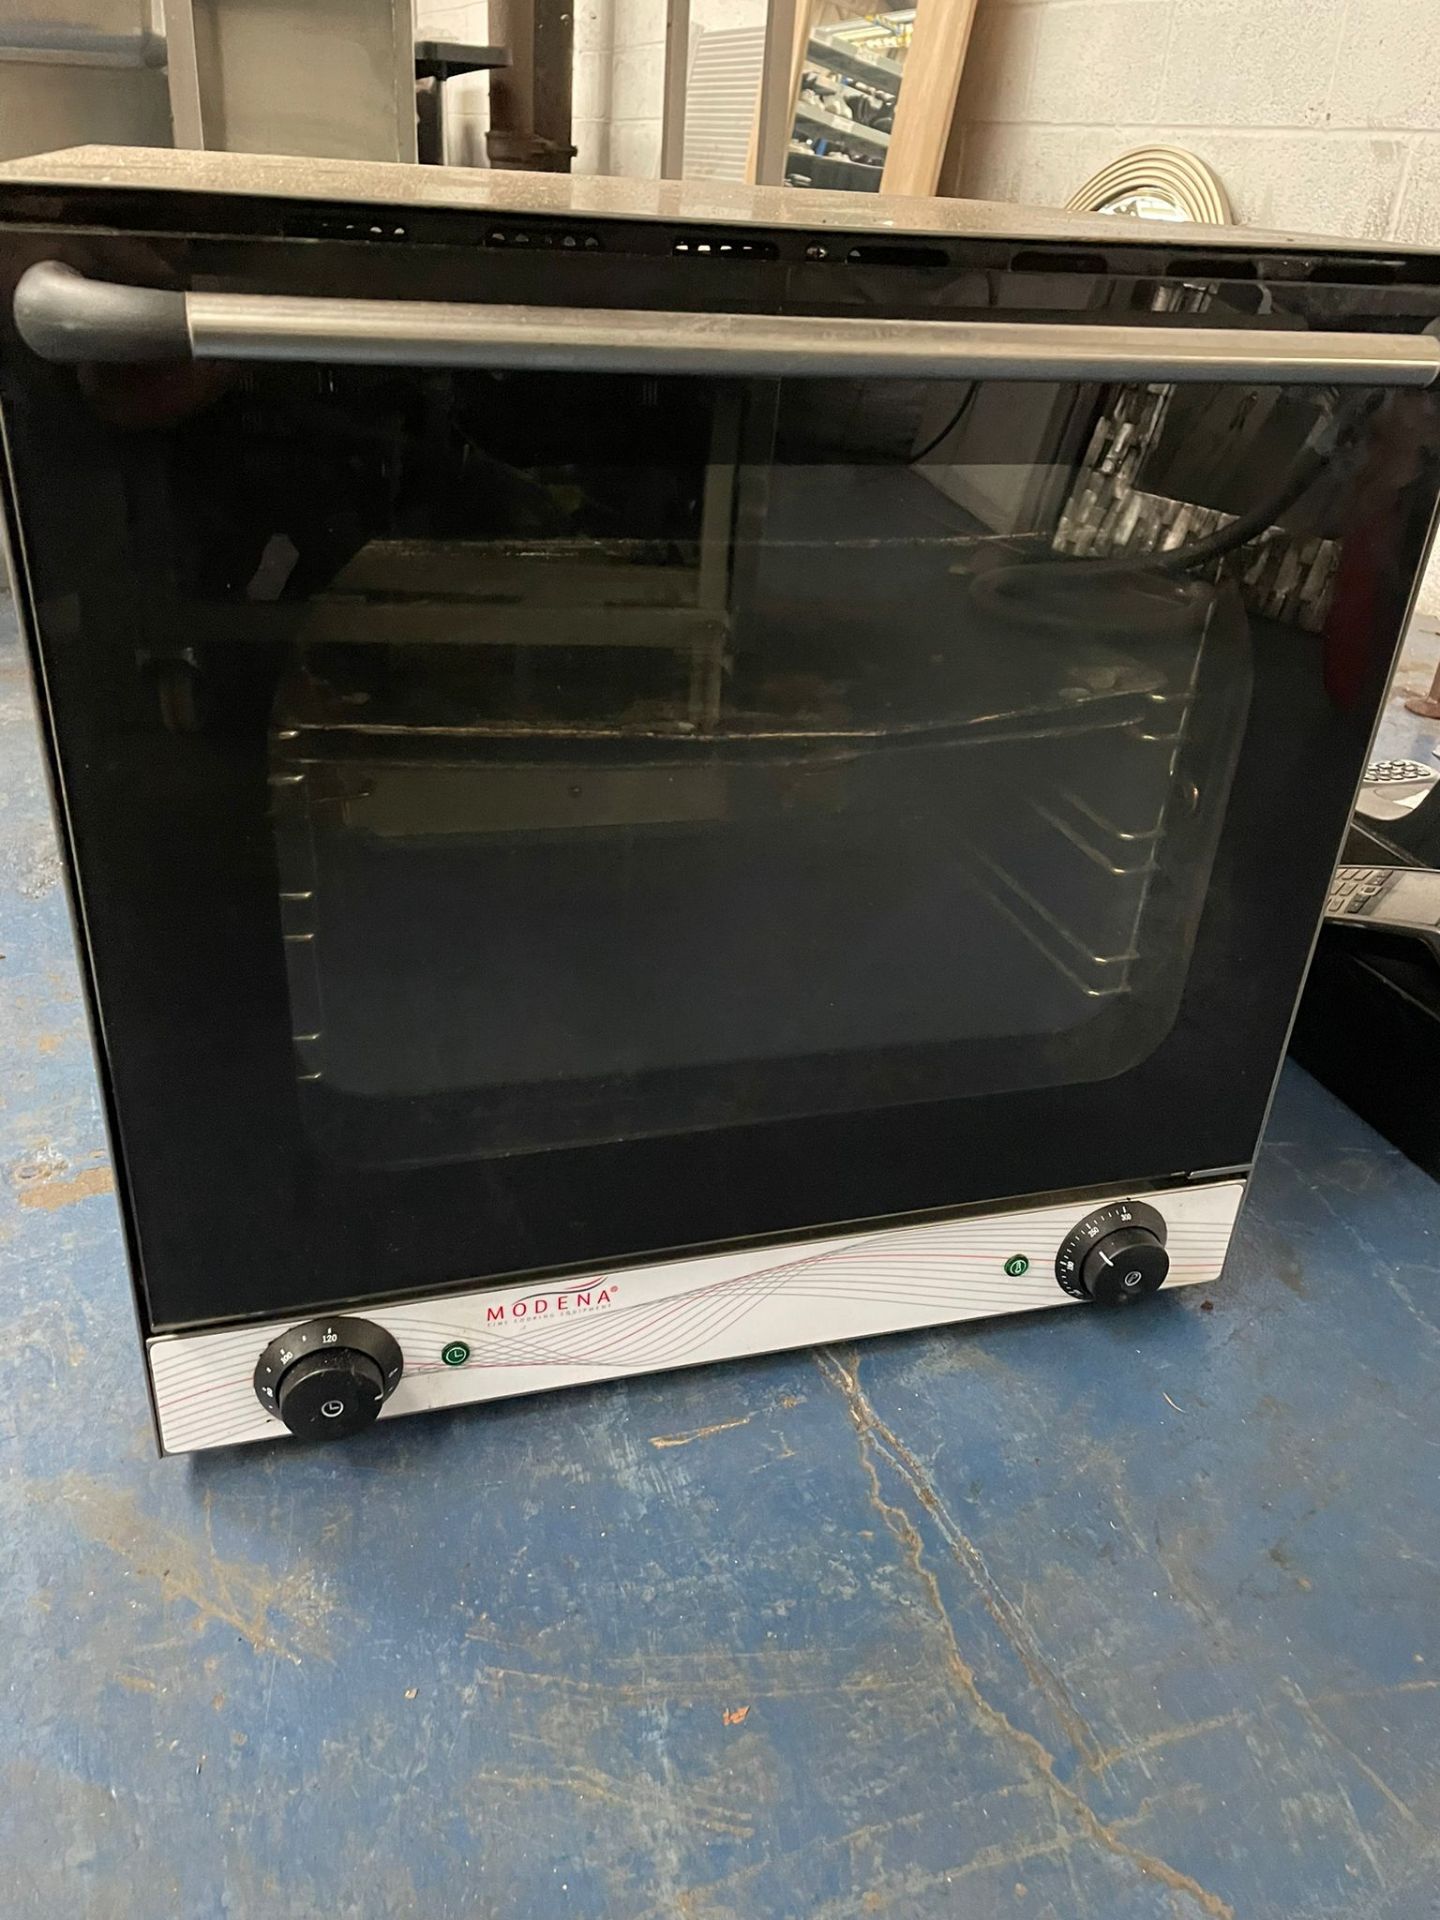 Modena RL1 convection Oven - Image 2 of 5